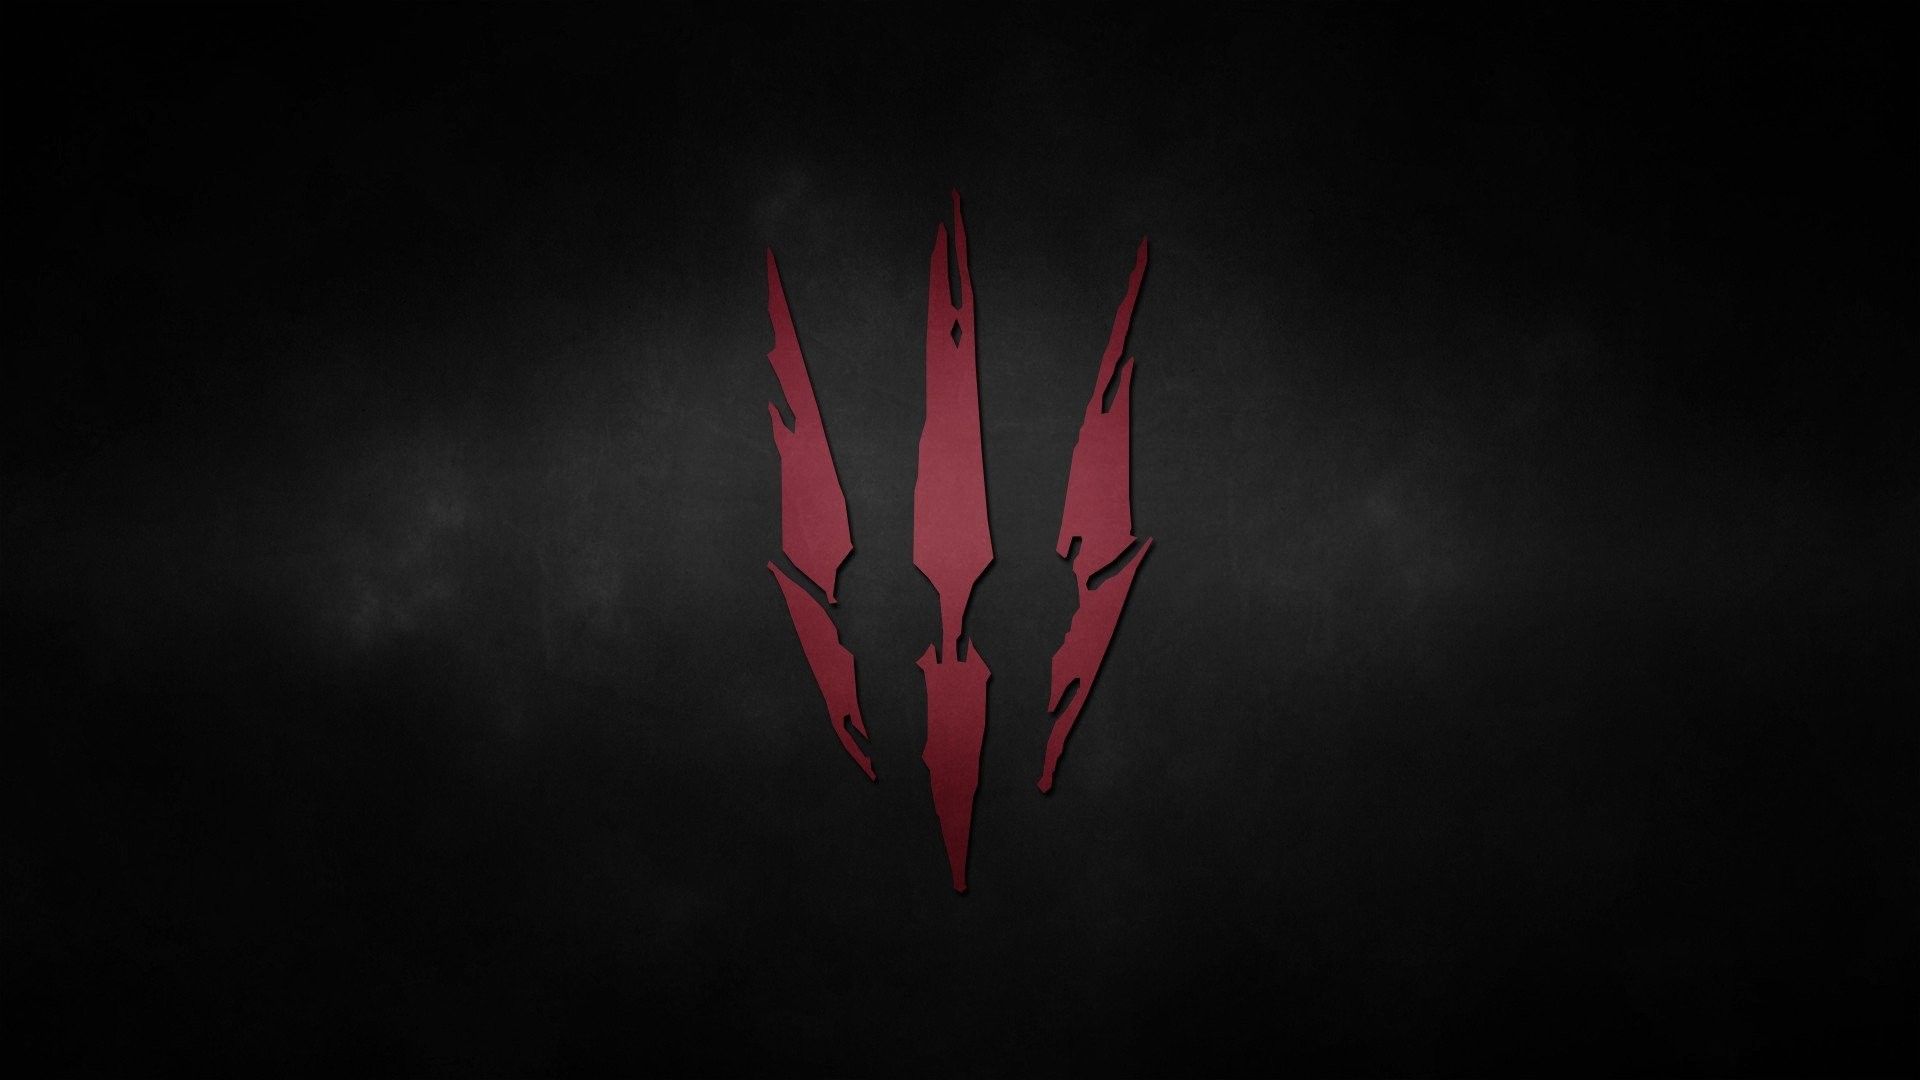 The Witcher Series Minimal Wallpapers